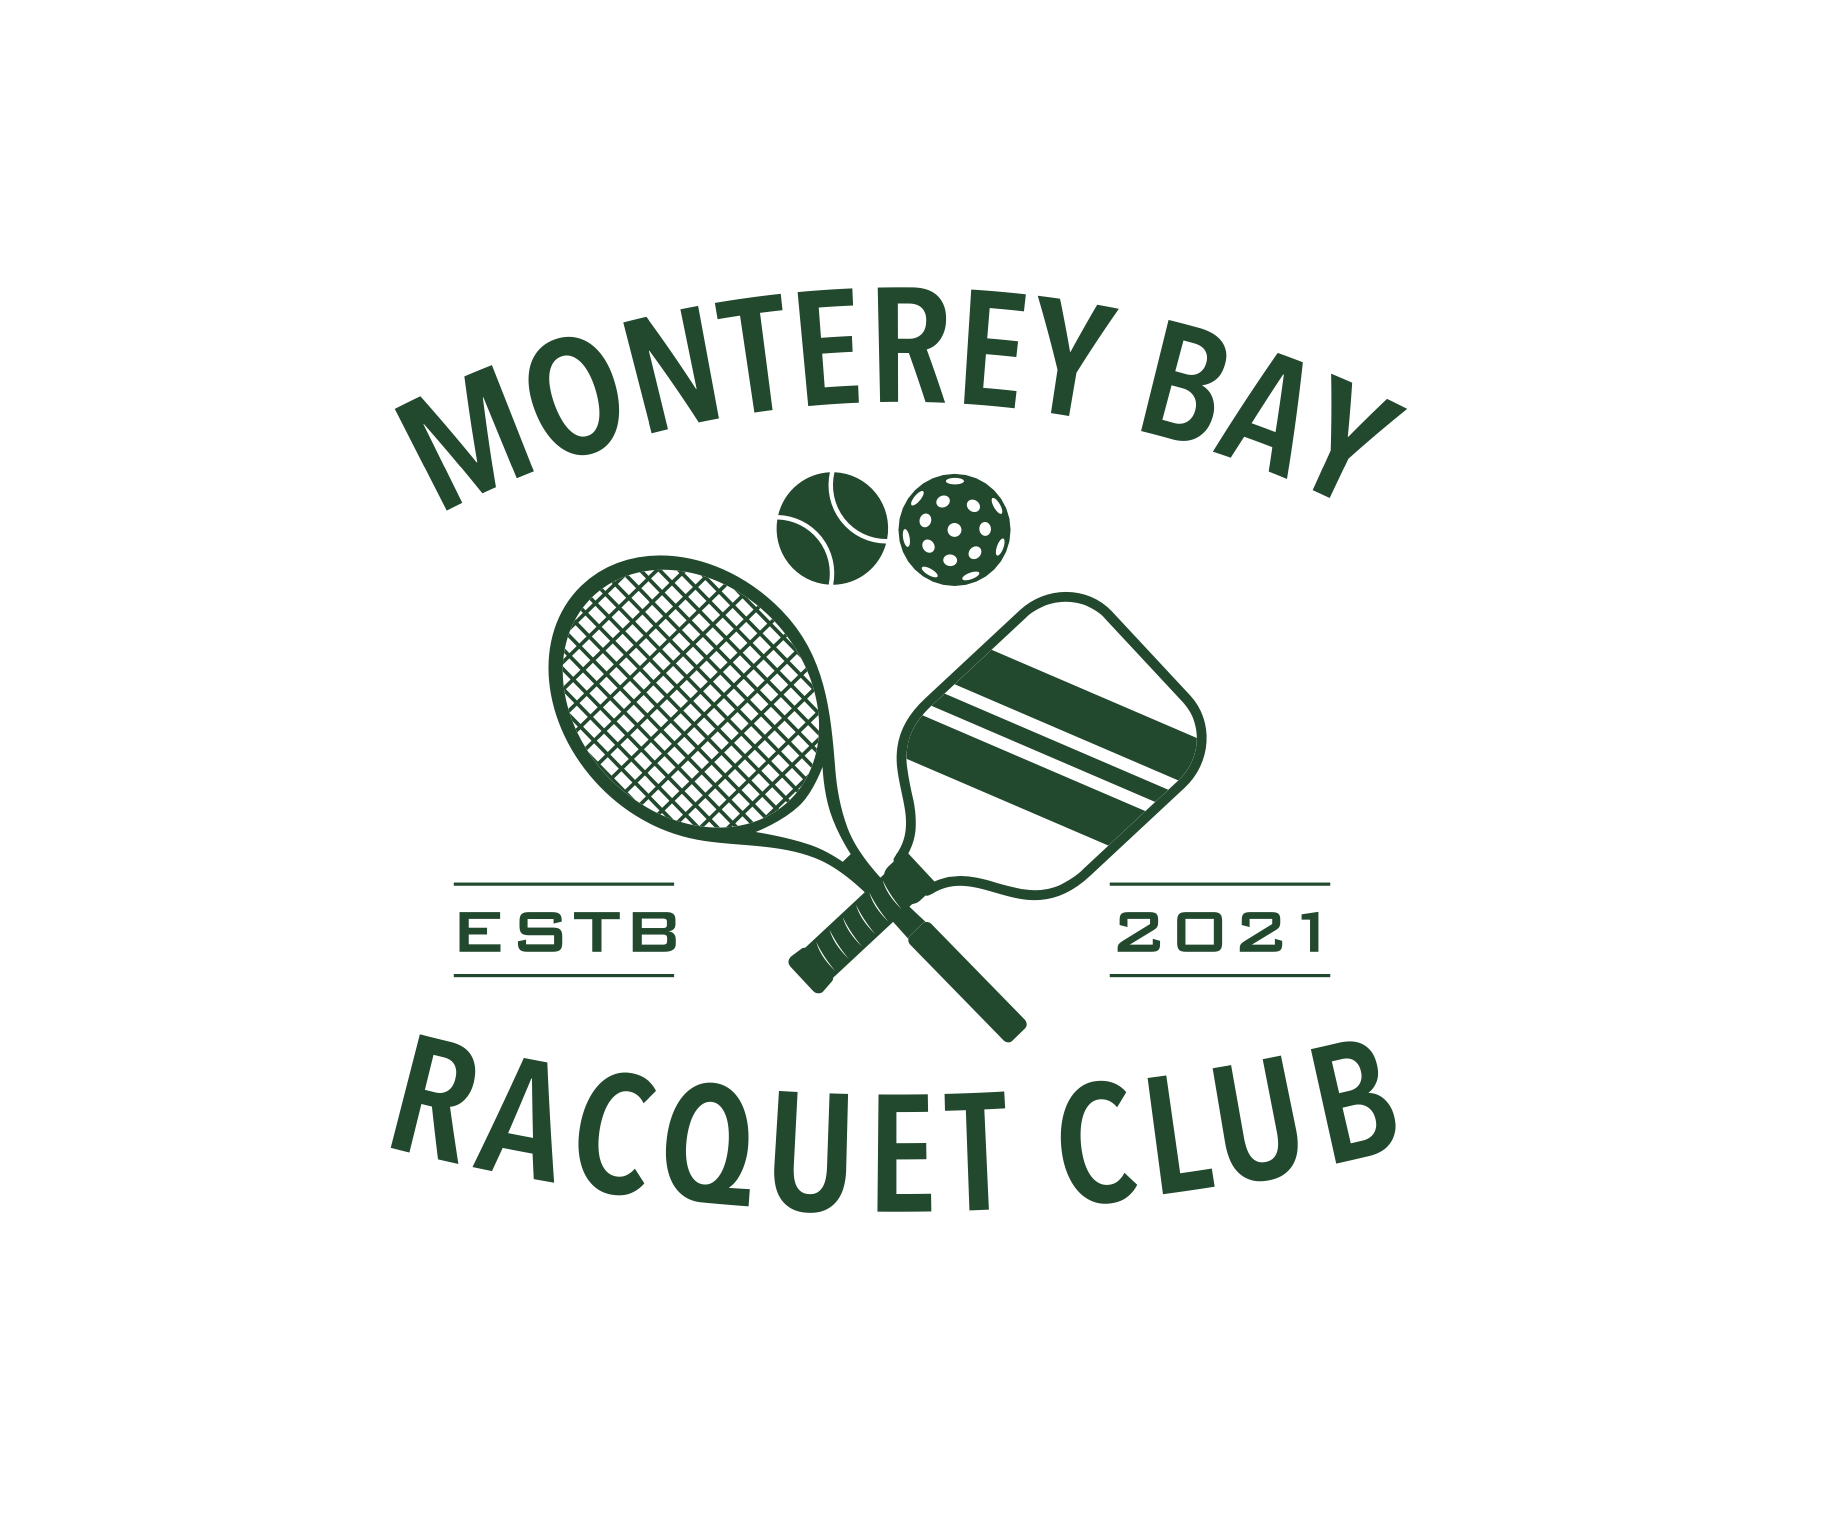 Image 1 of 9 of Monterey Bay Racquet Club court